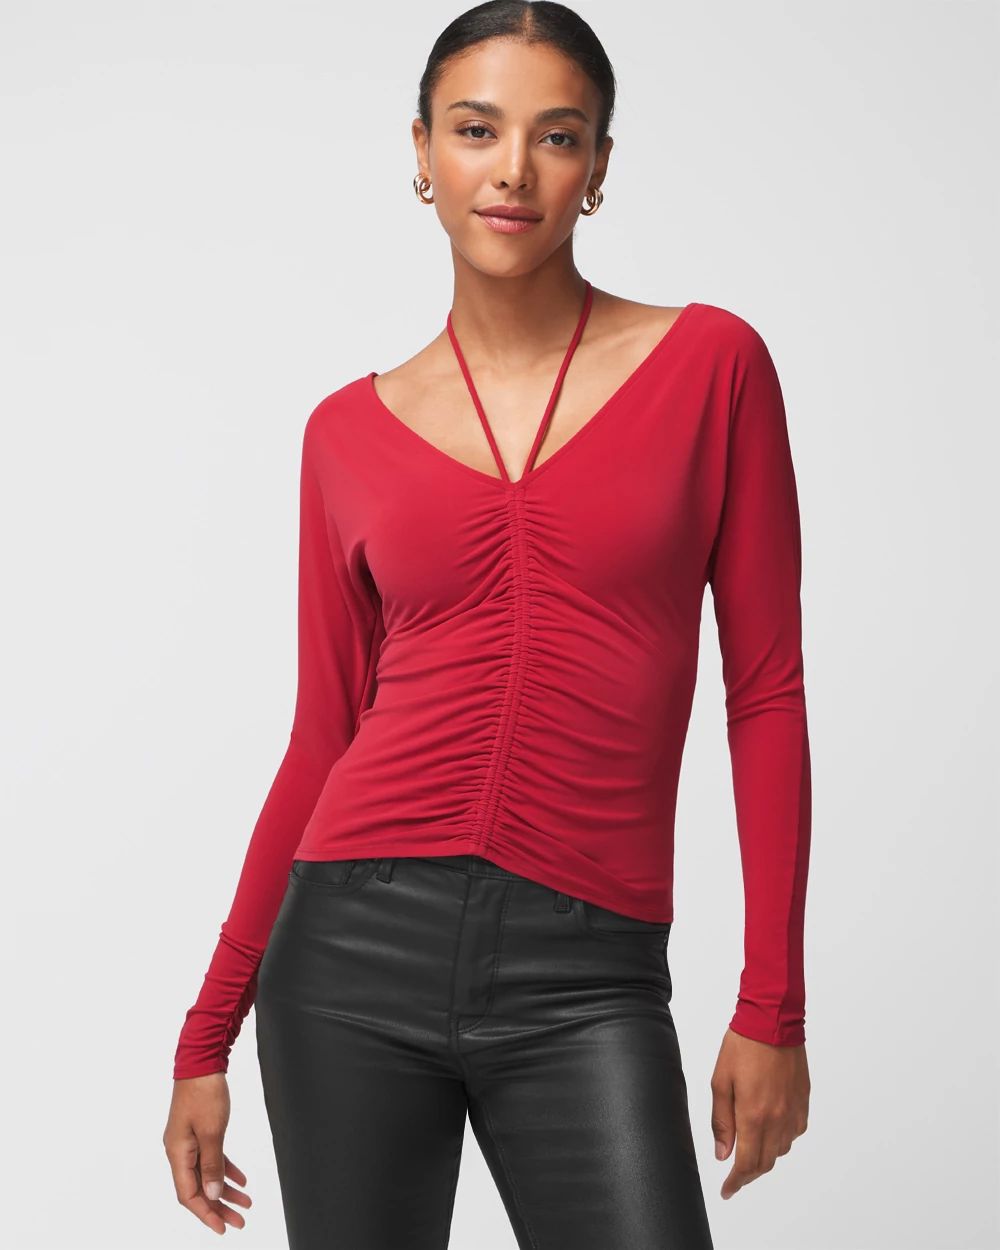 Long Sleeve Ruched Front Matte Jersey Top click to view larger image.